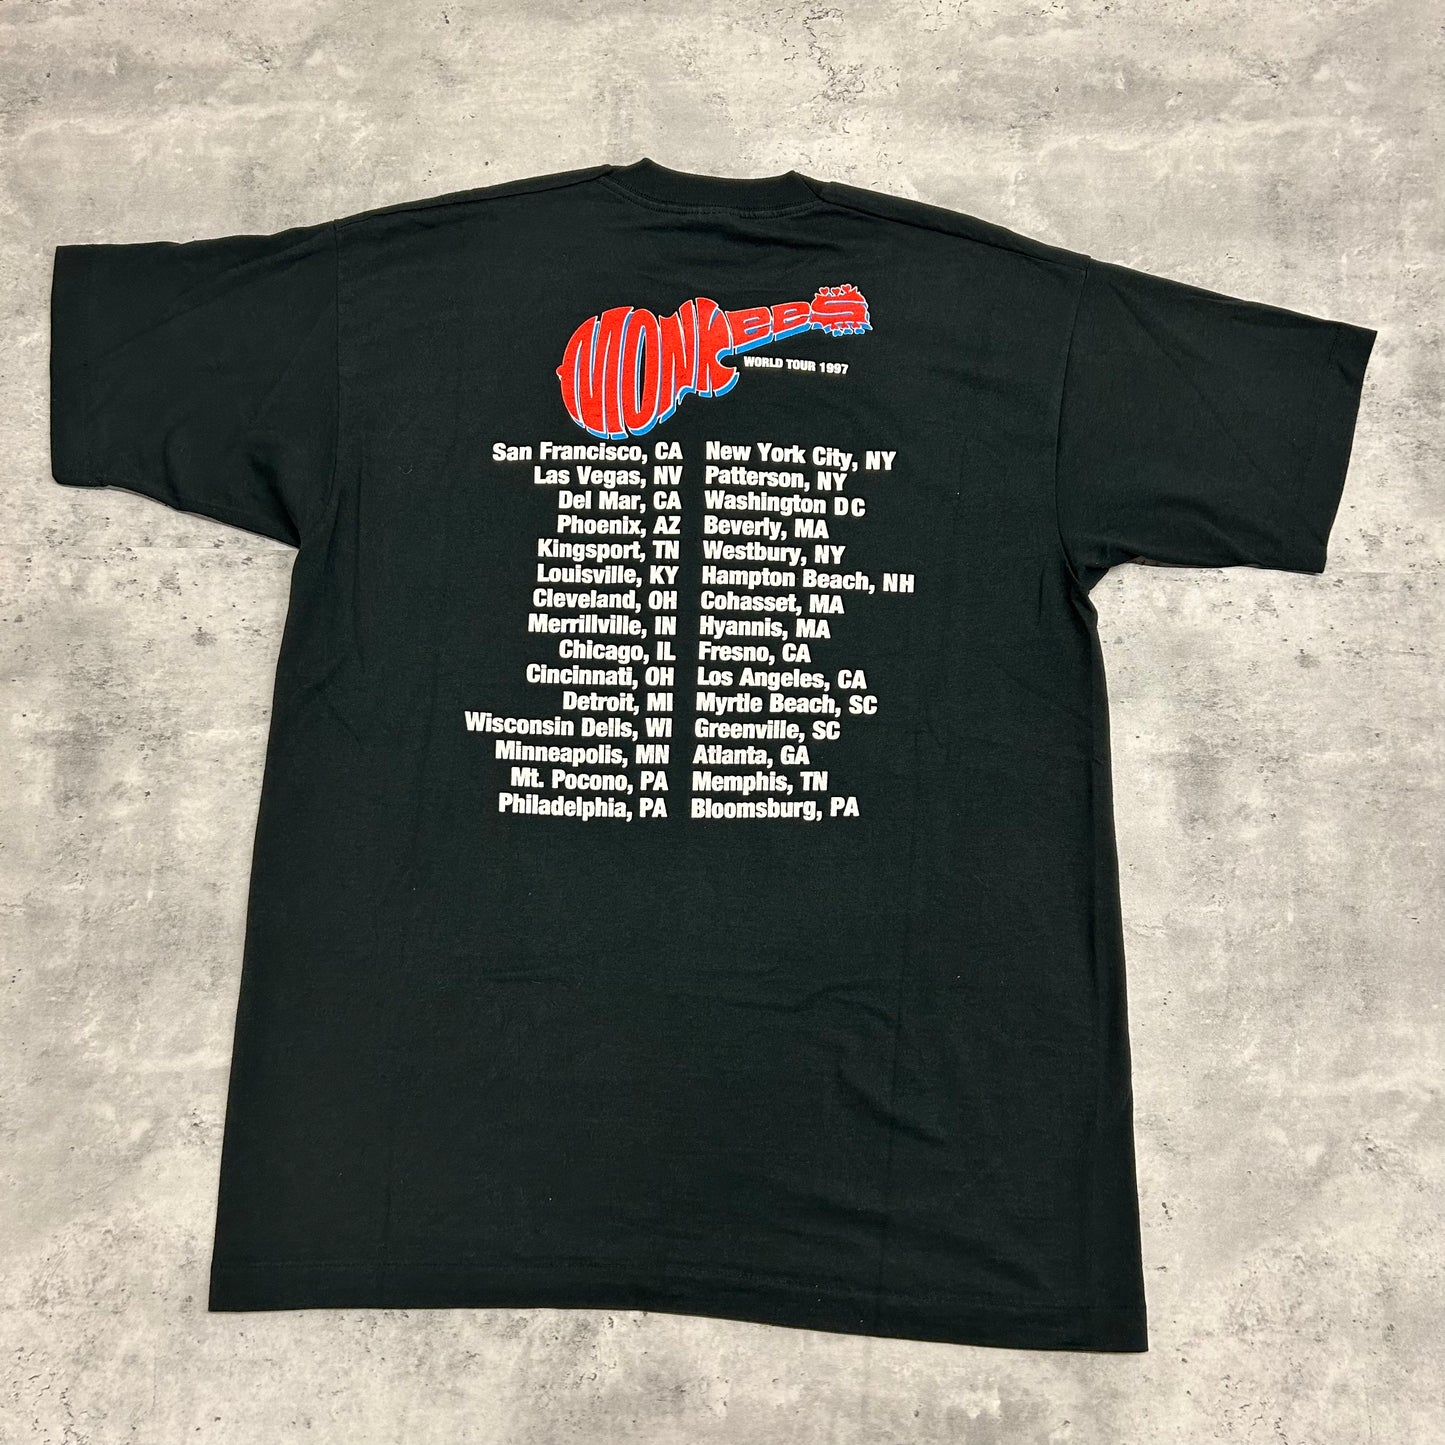 1997 The Monkees Band T-Shirt size XL